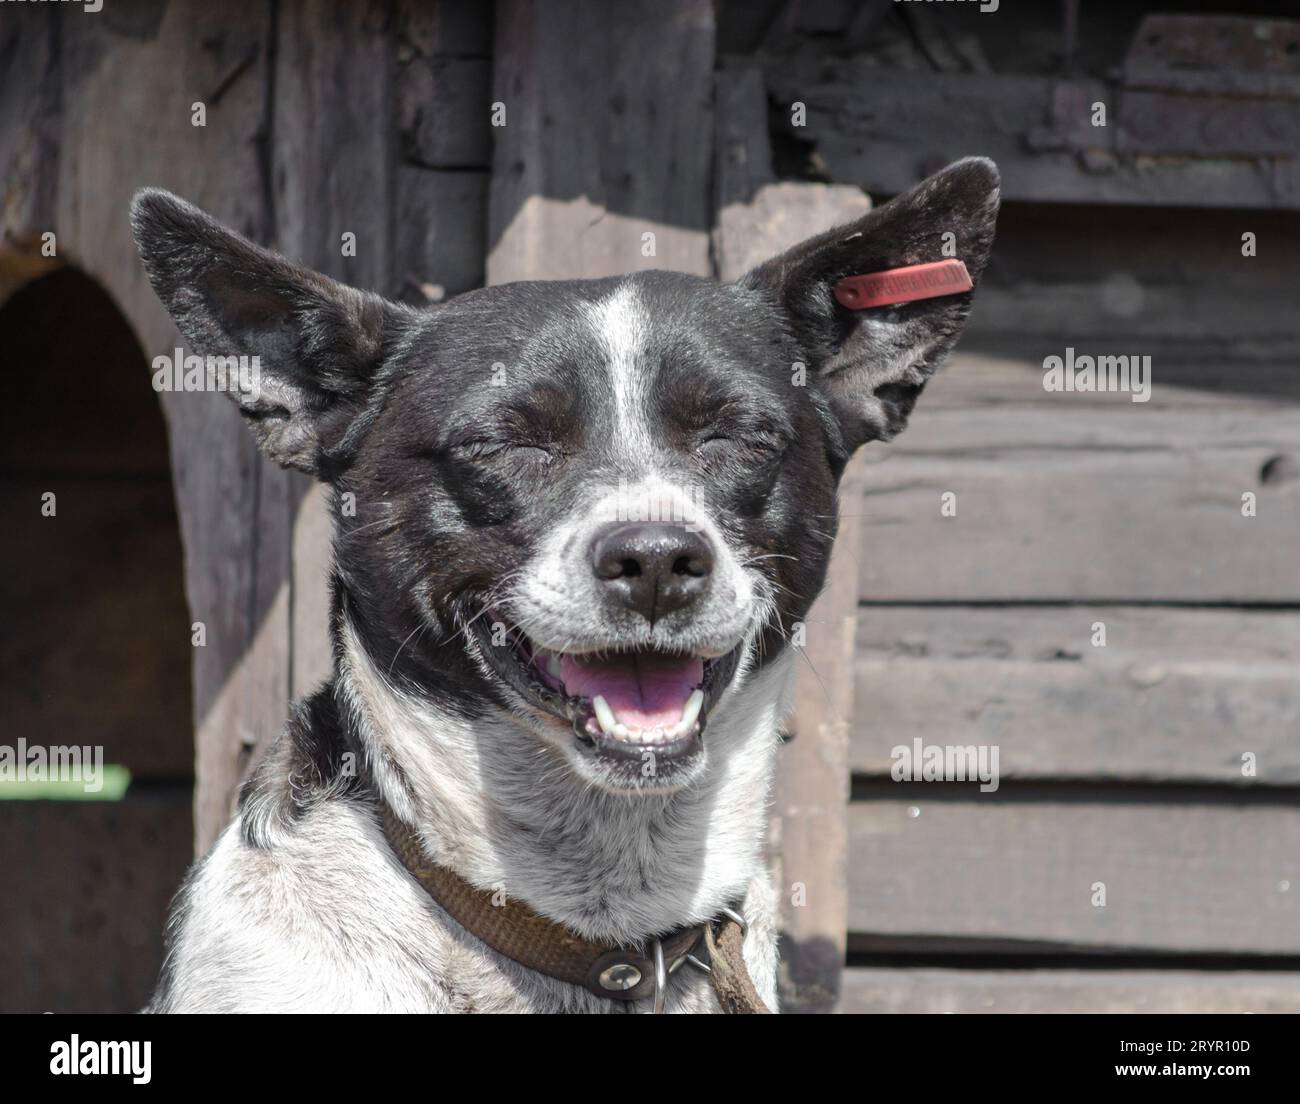 Black and white dog smiling on the background of a wooden booth Stock Photo